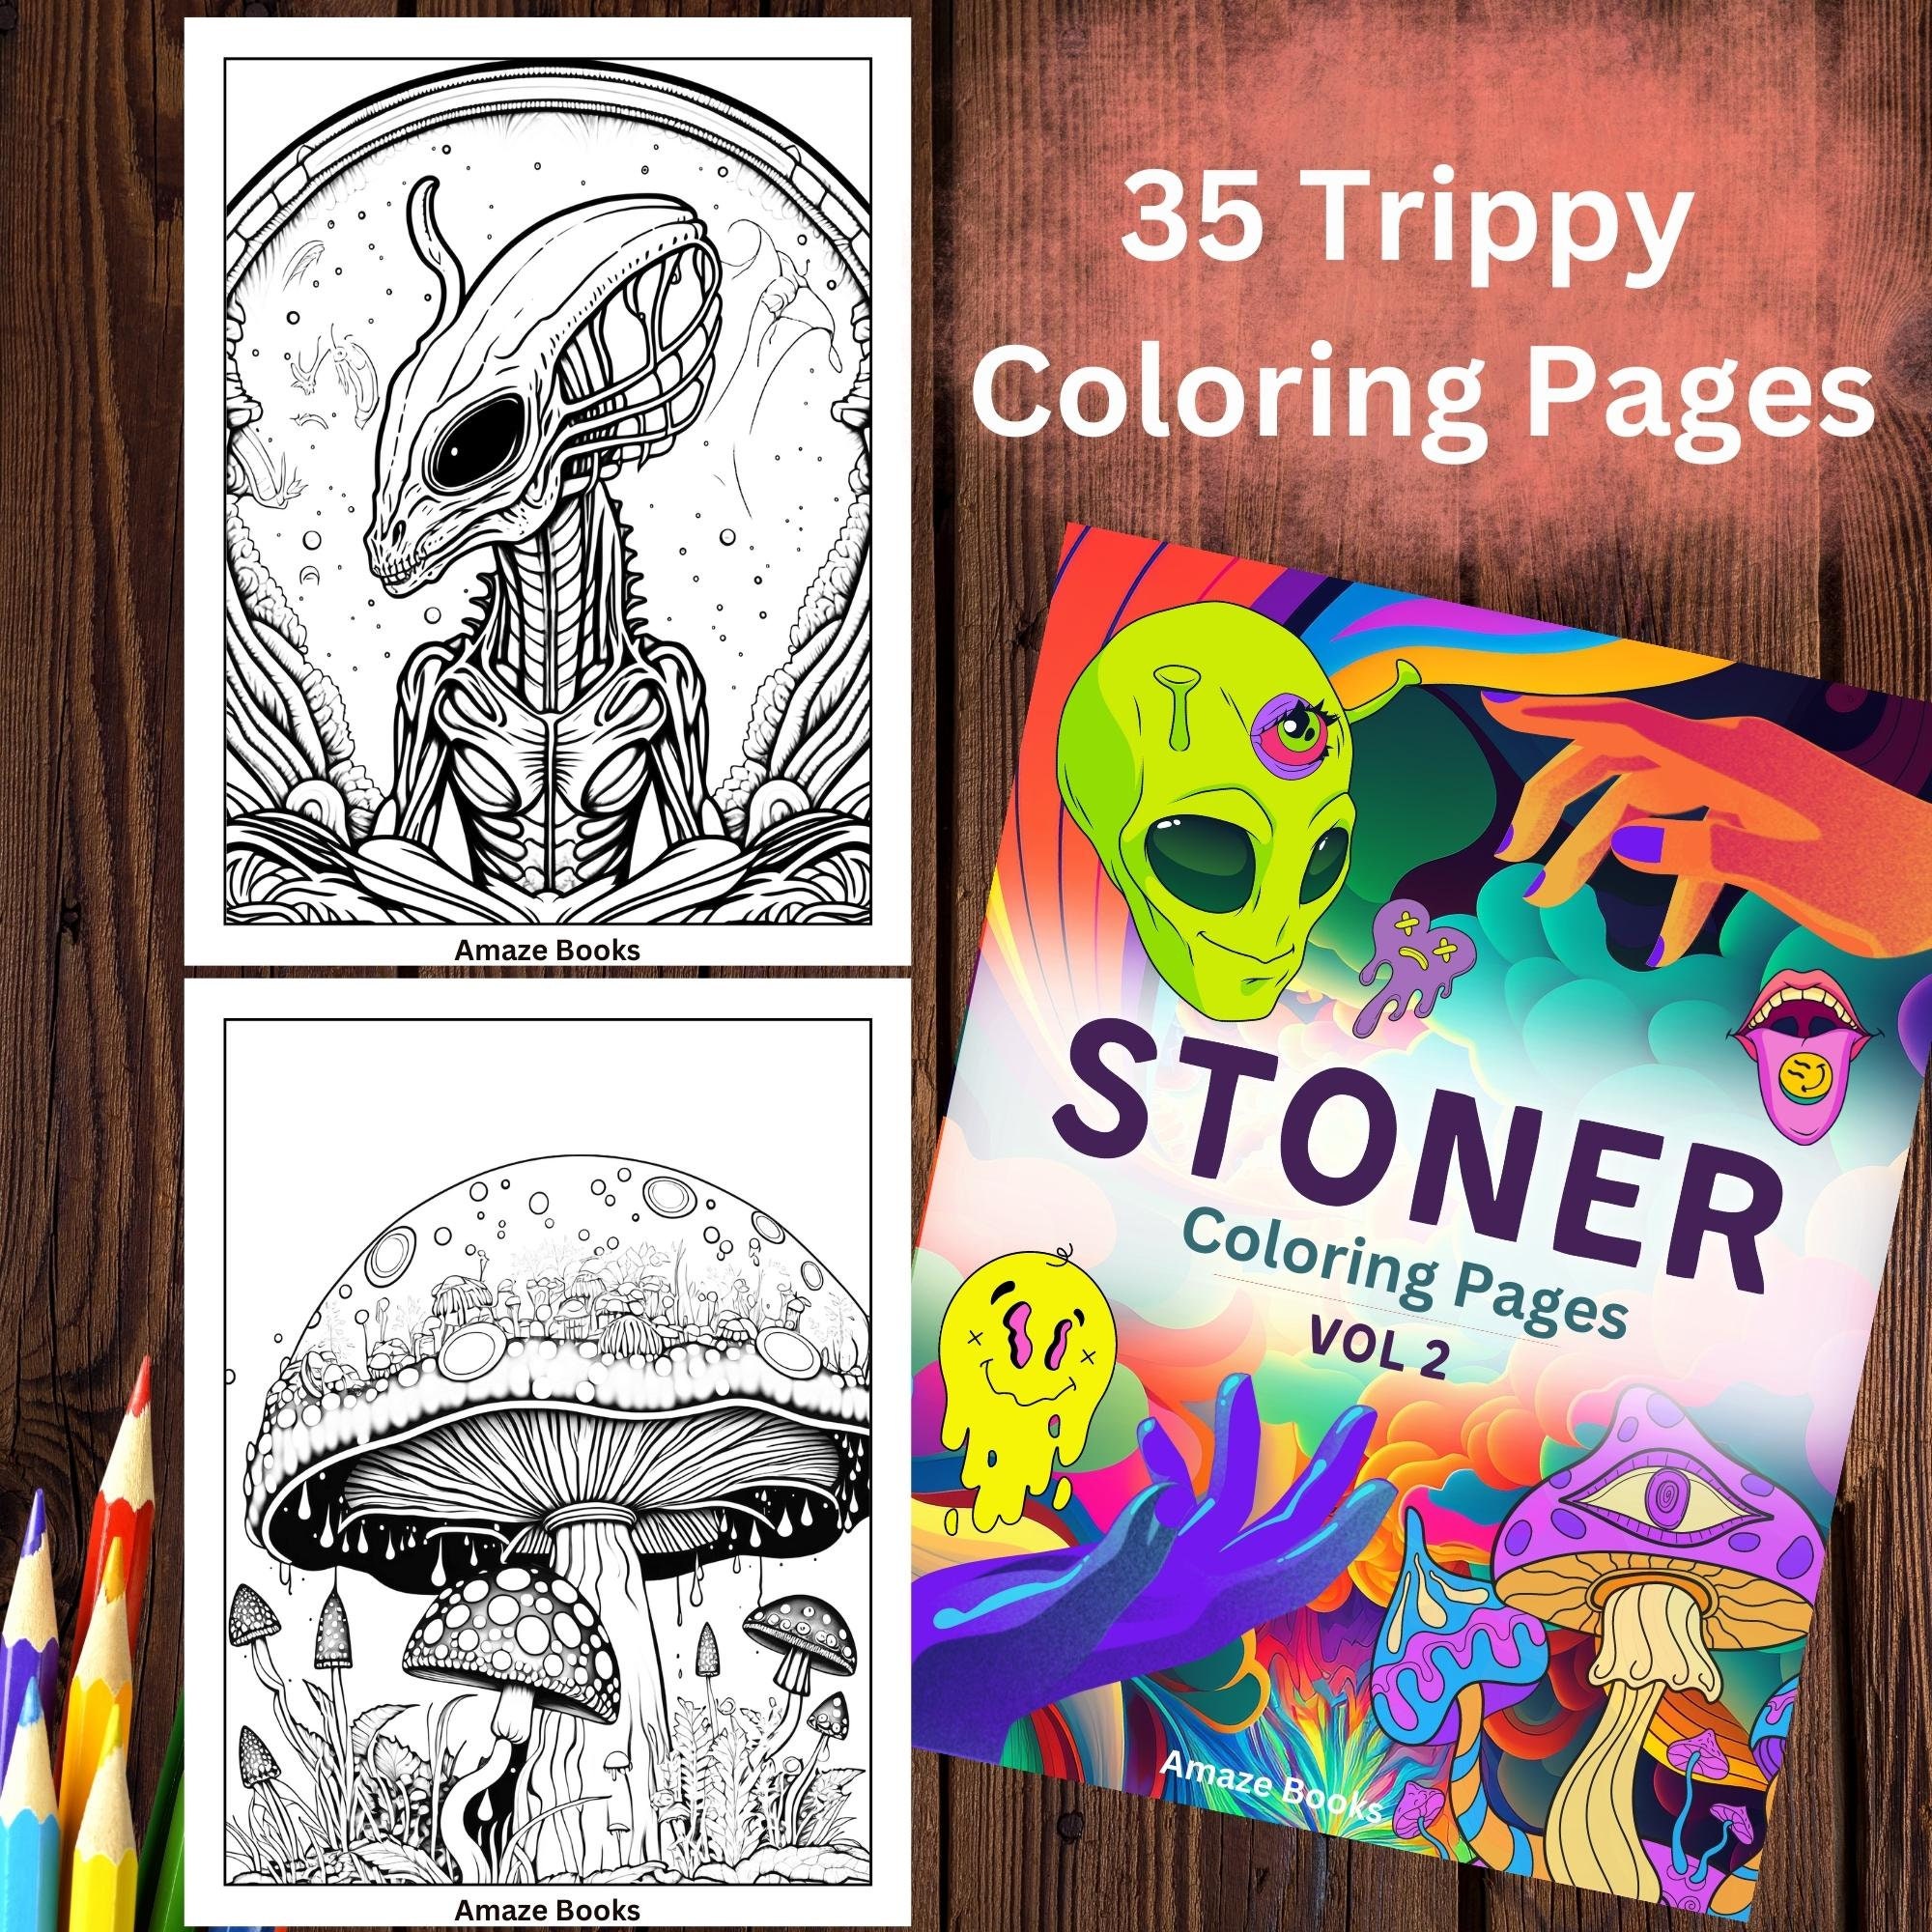 Stoner Coloring Book: A Trippy Coloring Book for Adults with Stress  Relieving and Relaxation Psychedelic Designs (Paperback)